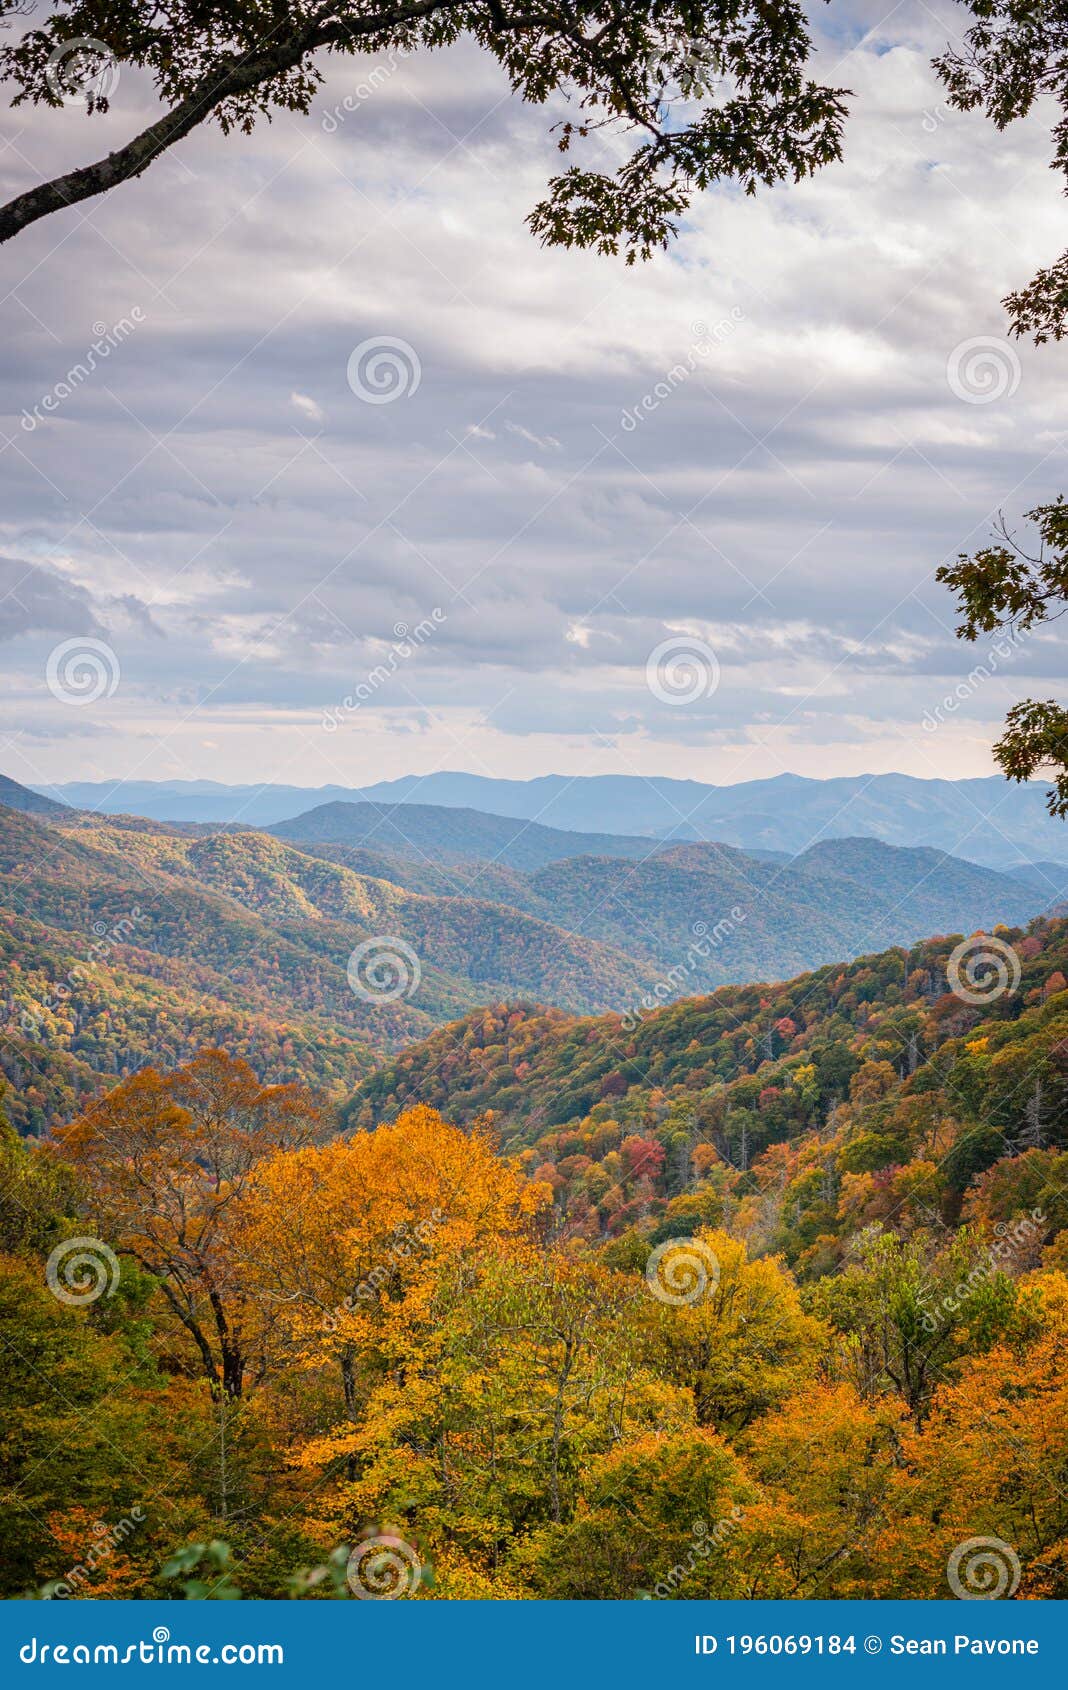 great smoky mountains national park, tennessee, usa at the newfound pass